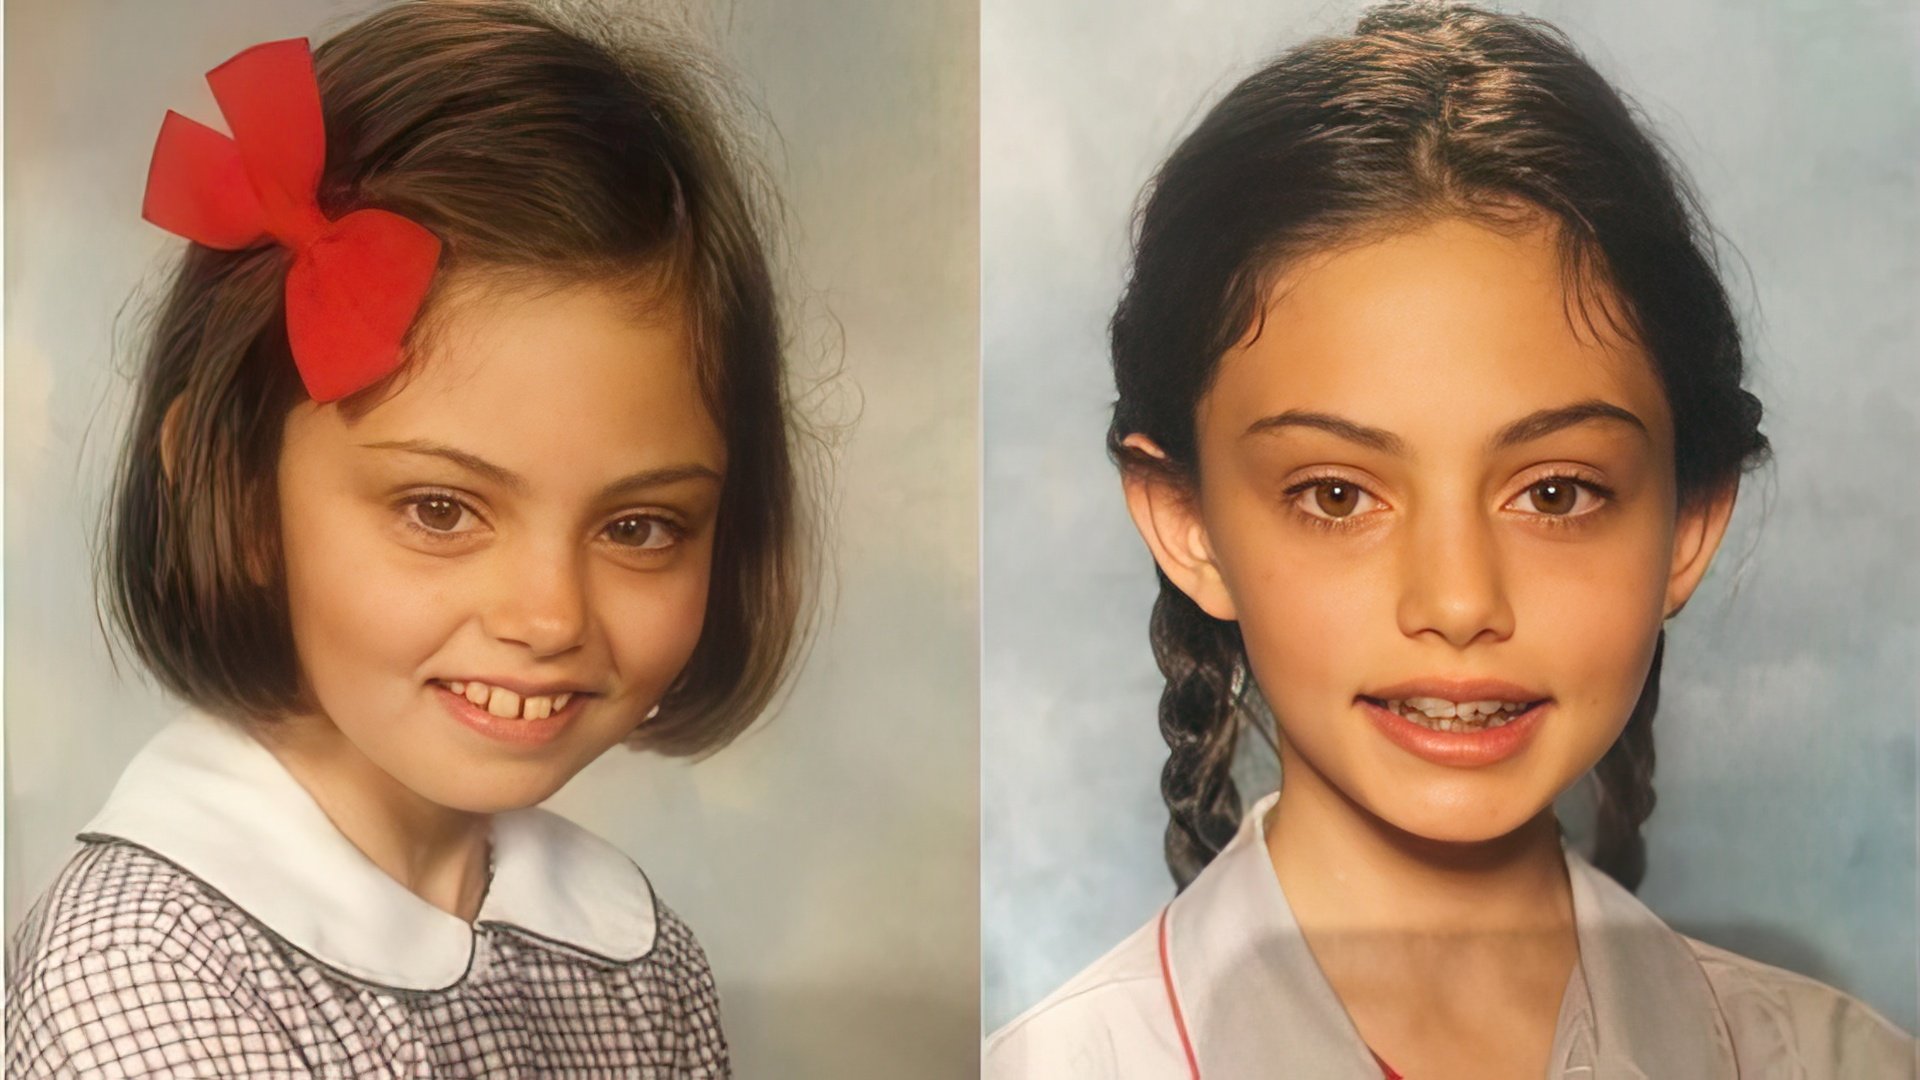 Phoebe Tonkin in her youth